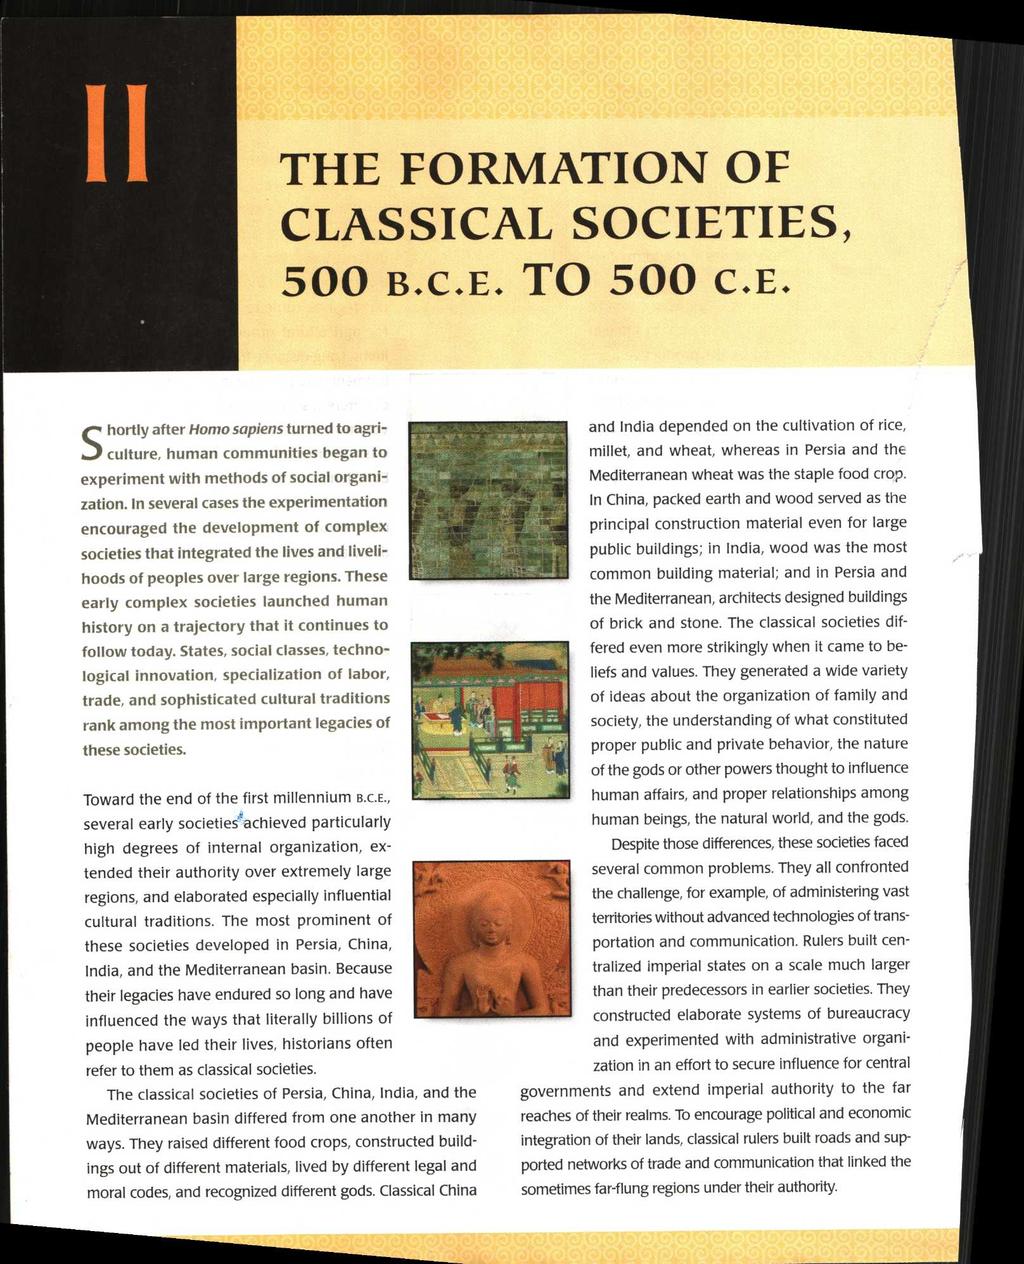 THE FORMATION ----- O F CLASSICAL SOCIETIES, 500 B.C.E. TO 500 C.E. S hortly after Homo sapiens turned to agriculture, human communities began to experiment with methods of social organization.